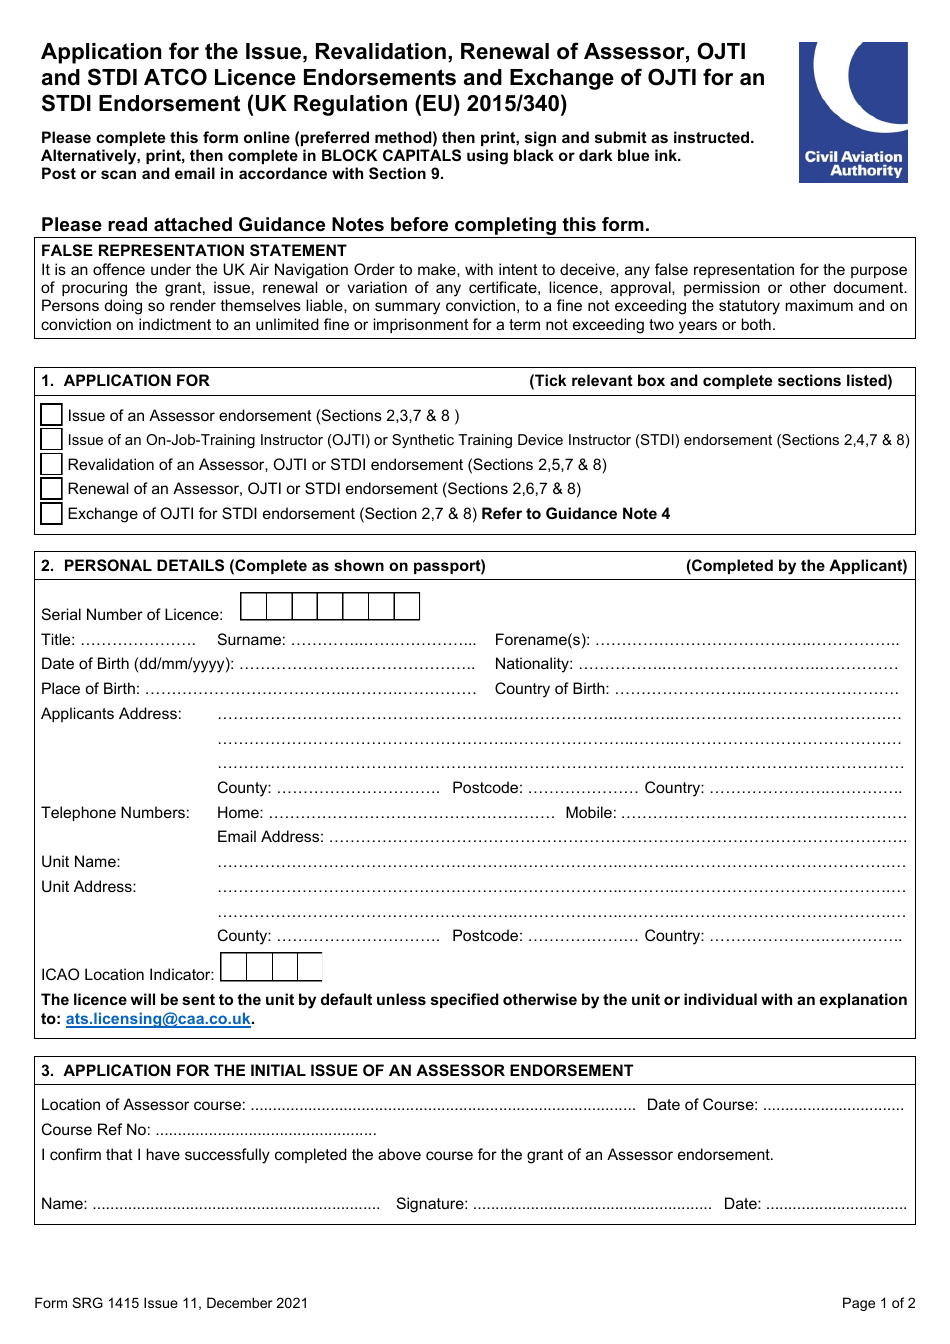 Form SRG1415 Application for the Issue, Revalidation or Renewal of an Atc Assessor, Ojti or Stdi Licence Endorsement - United Kingdom, Page 1